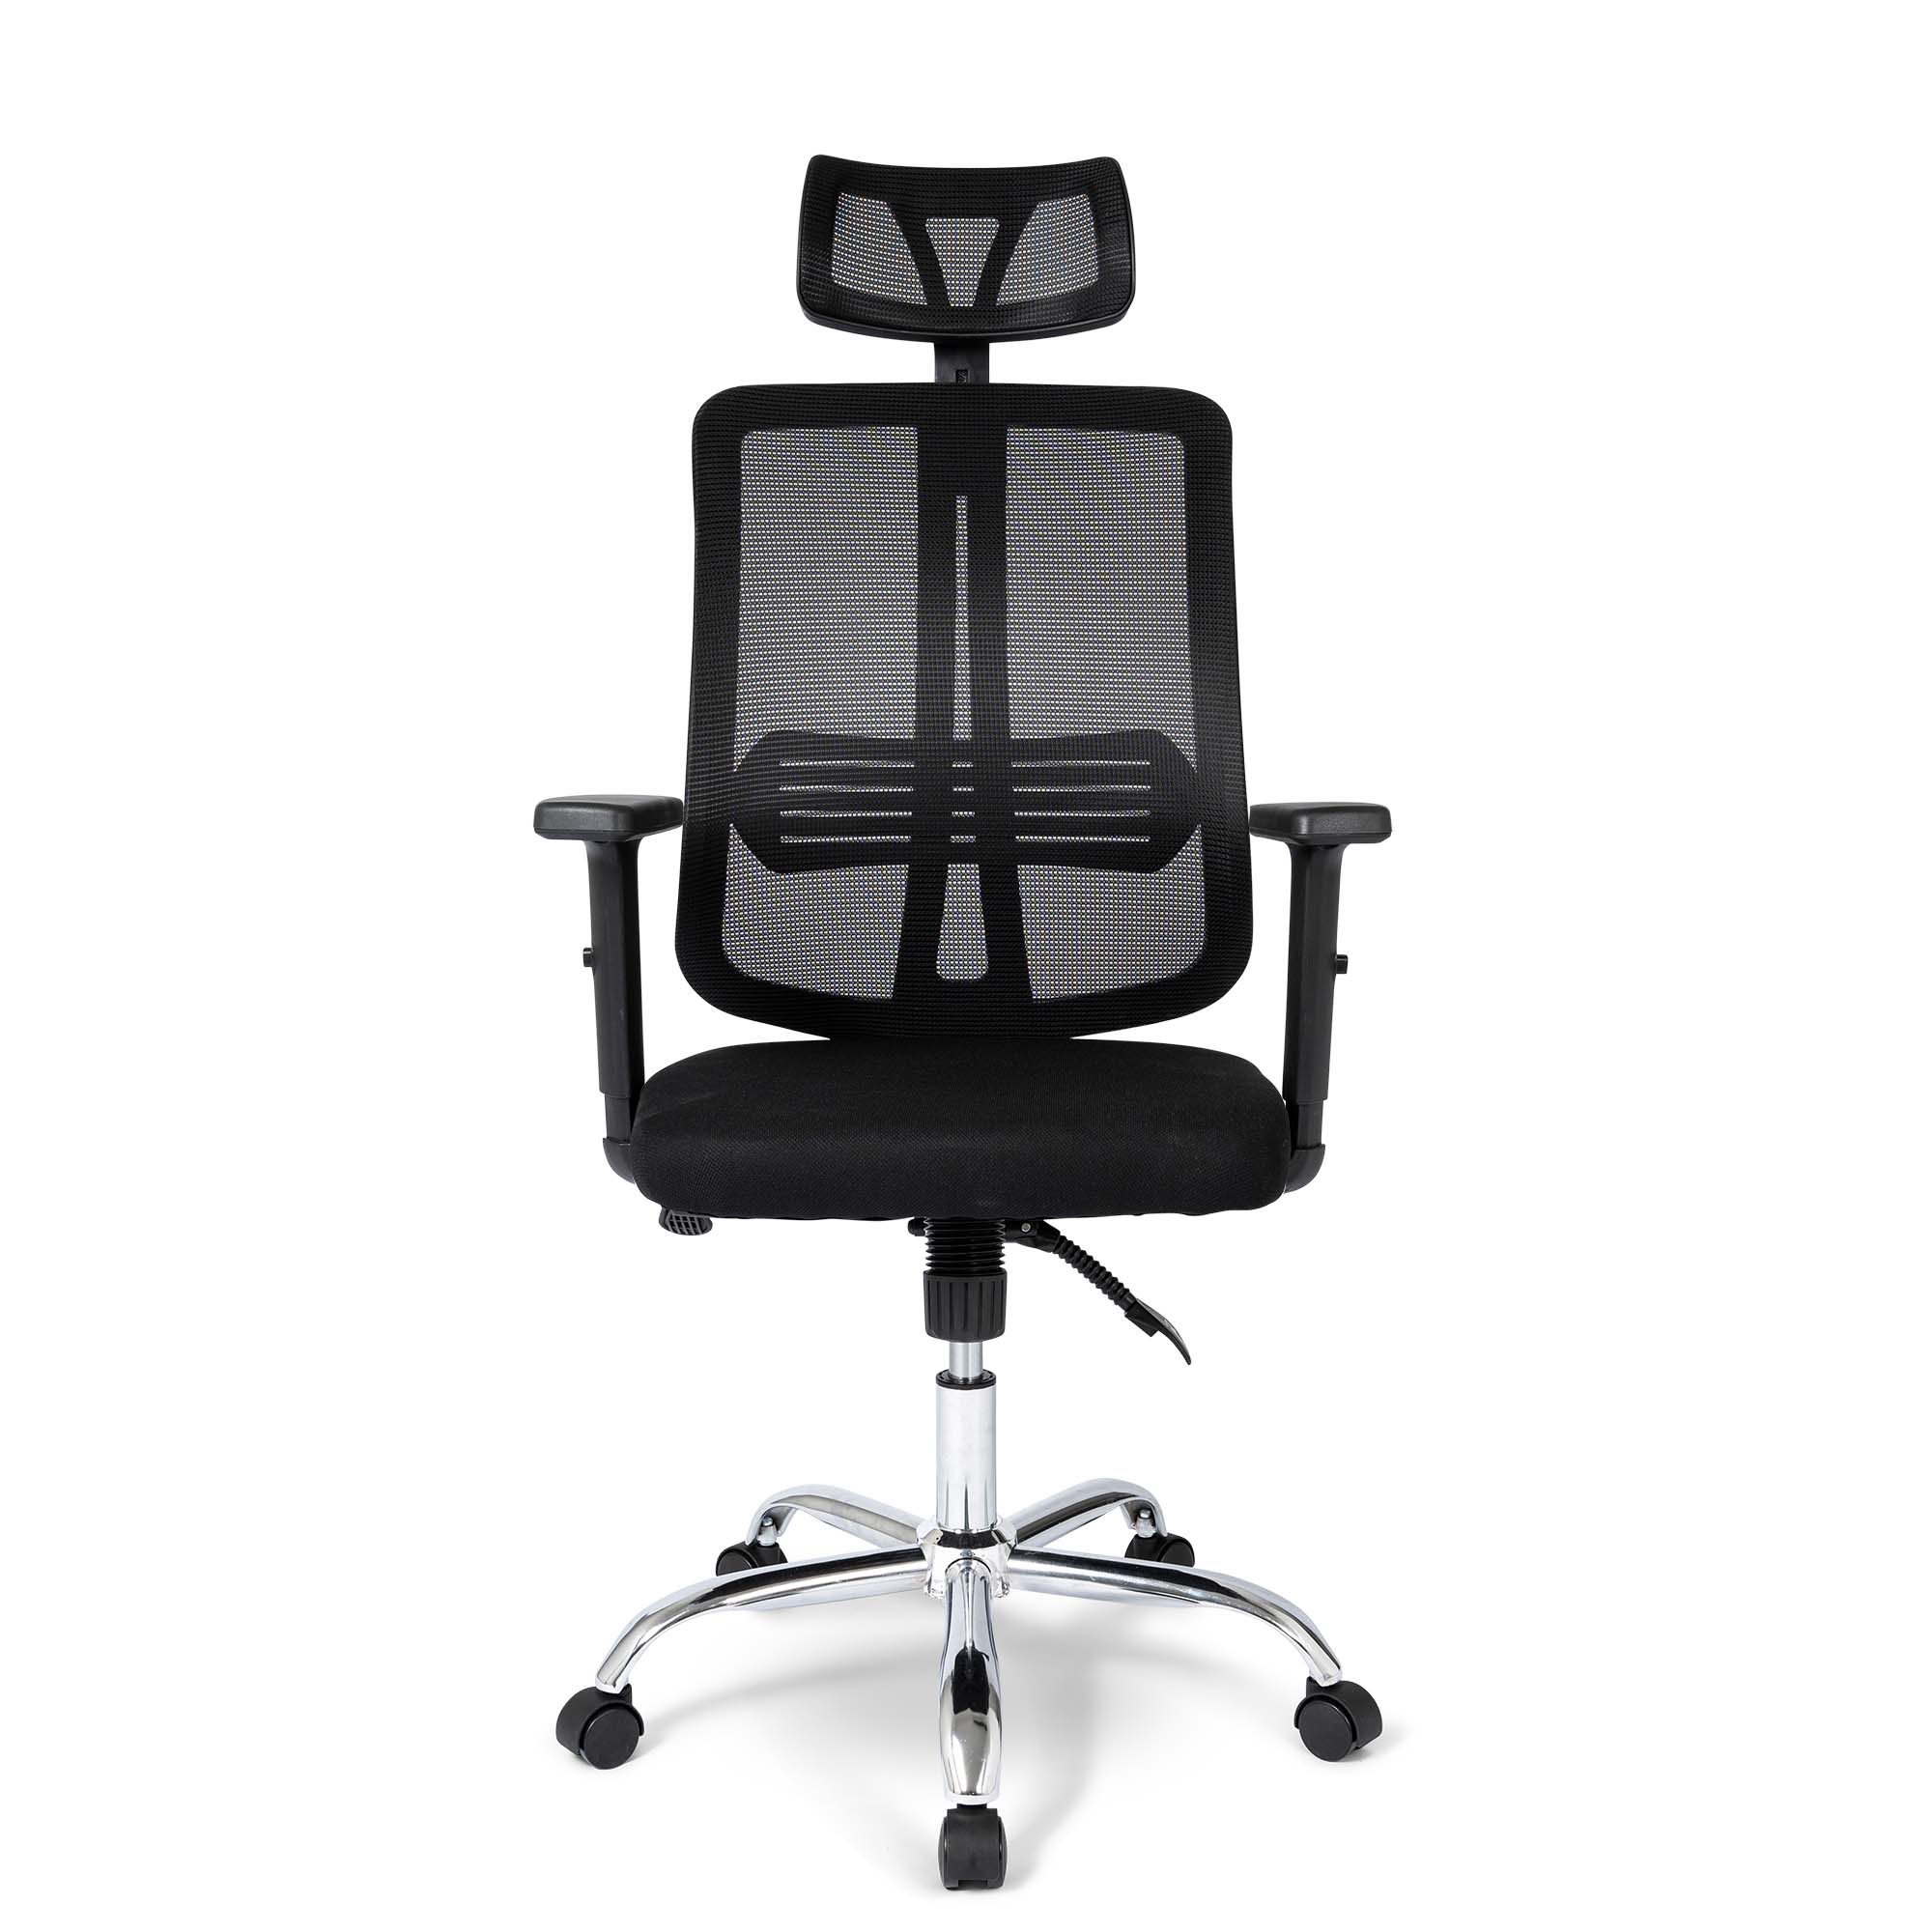 Ergodu Office Chair with Adjustable Armrests front view